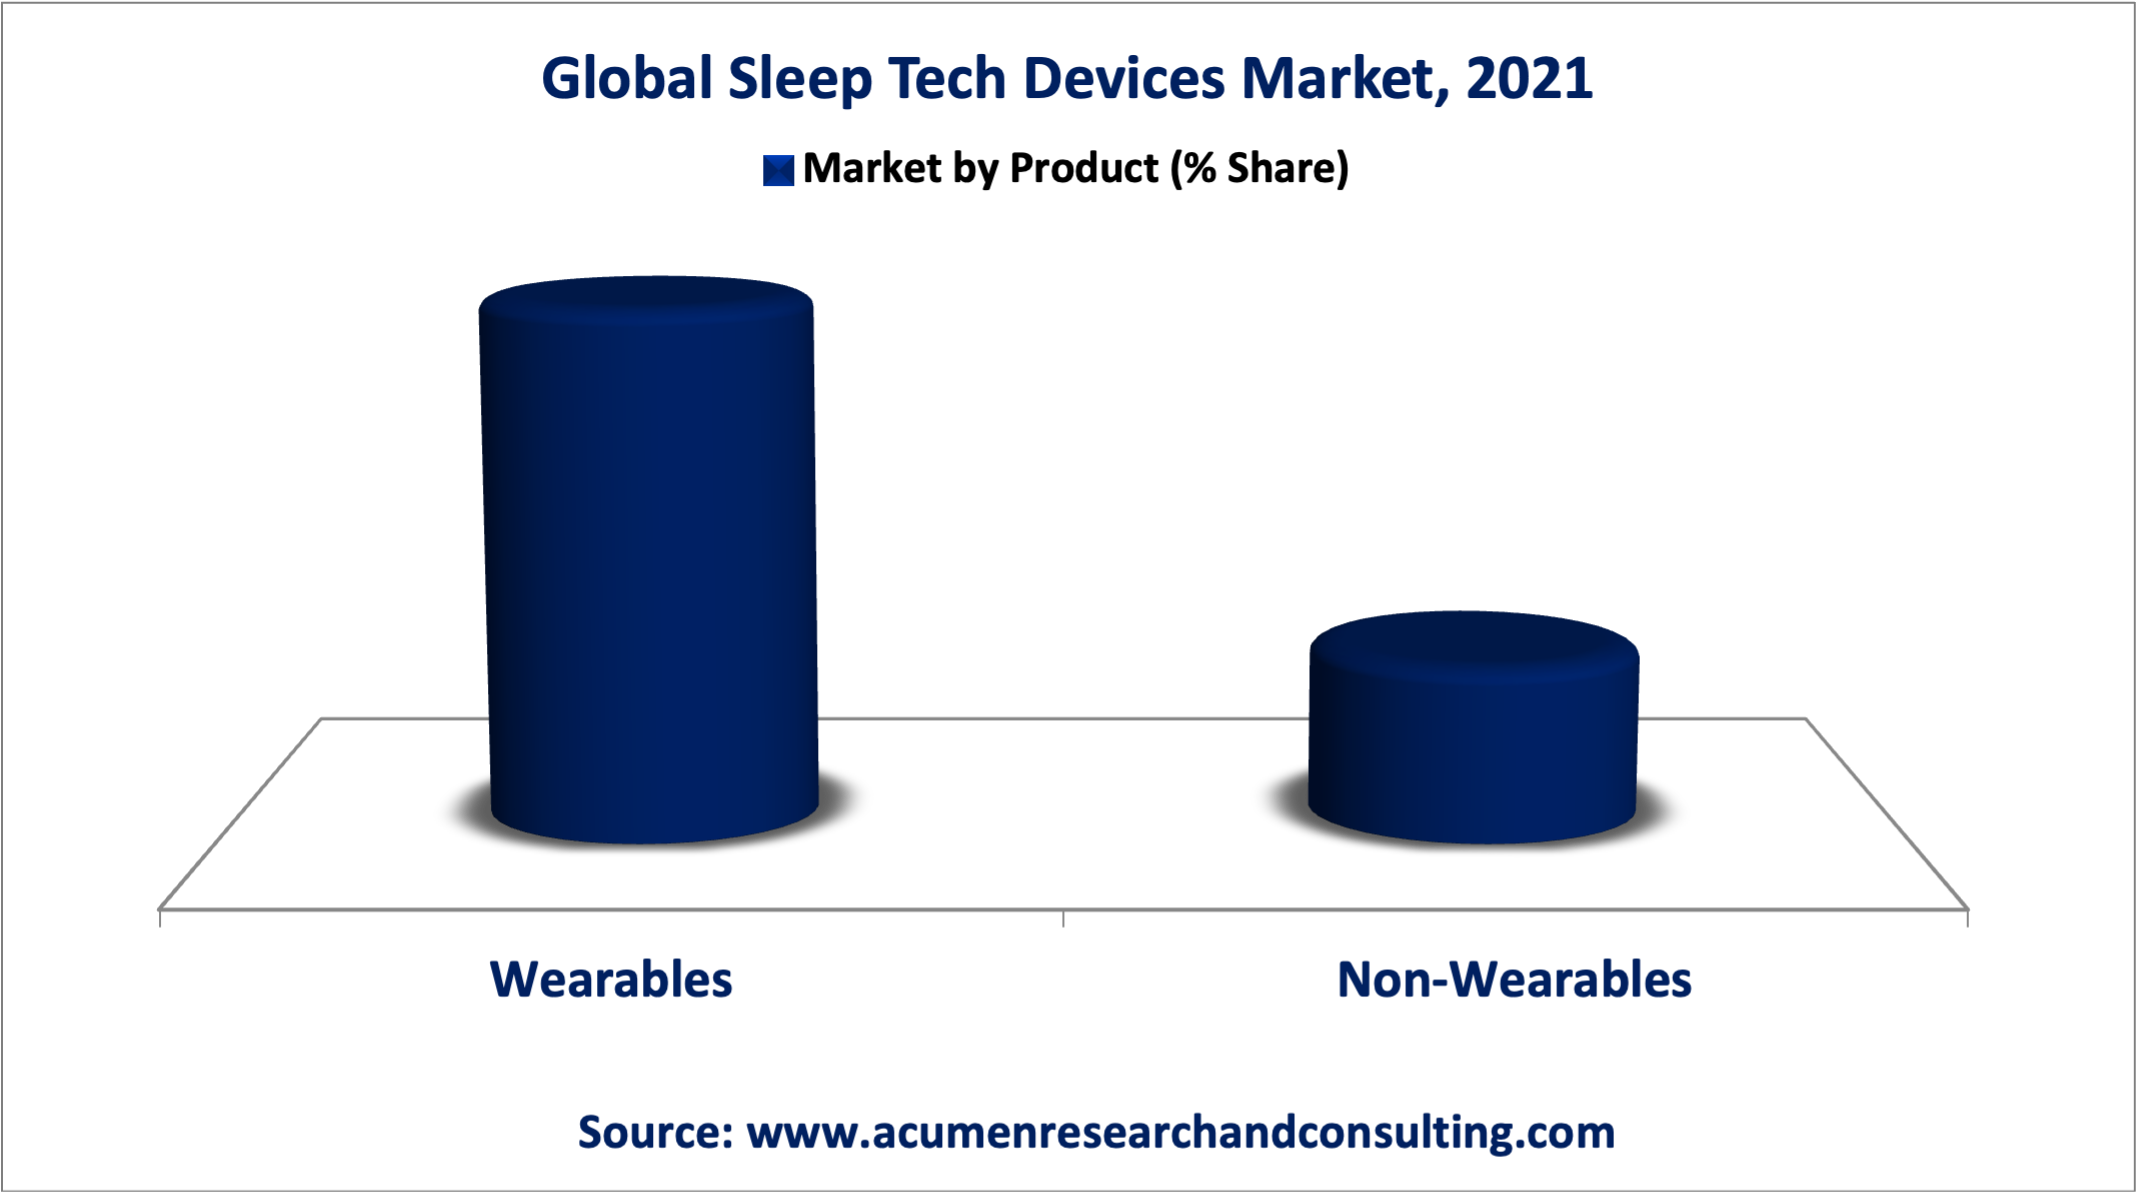 Sleep Tech Devices Market Analysis was valued at USD 15,407 Million in 2021 and is estimated to reach the value of USD 60,955 Million by 2030, growing at a CAGR of 16.8% from 2022 to 2030.